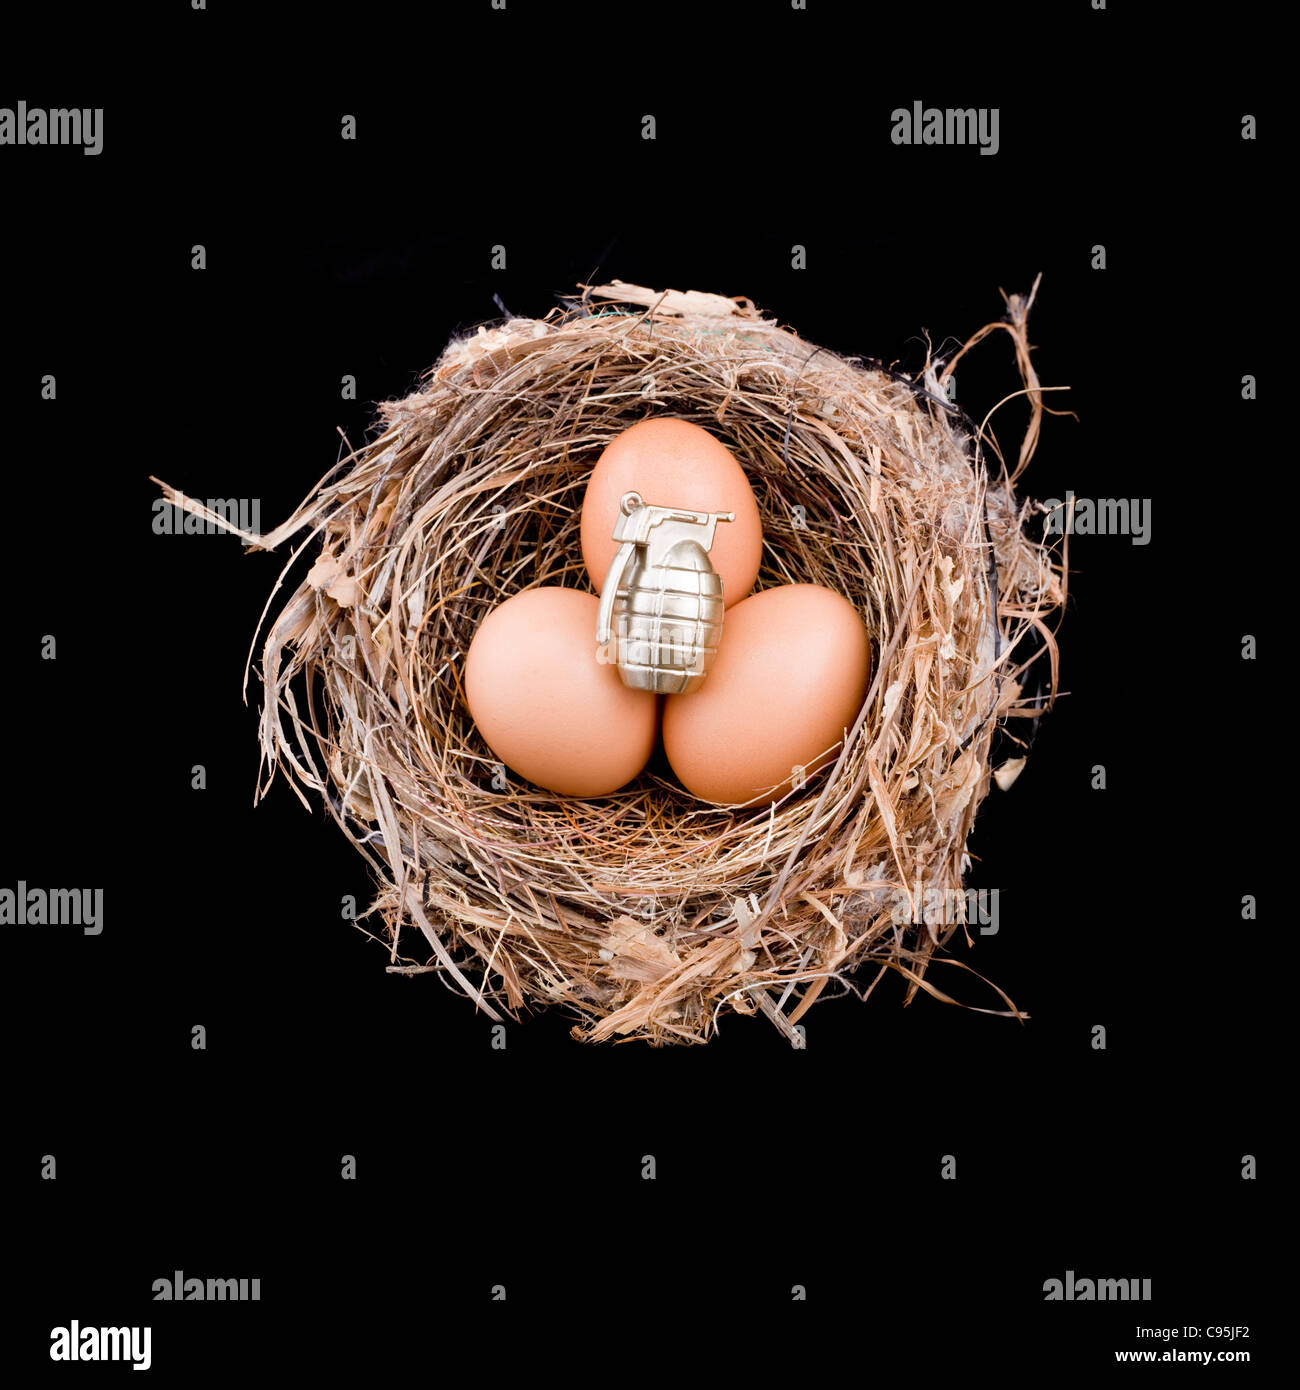 3 x eggs with 1 grenade sitting in a bird's nest Stock Photo